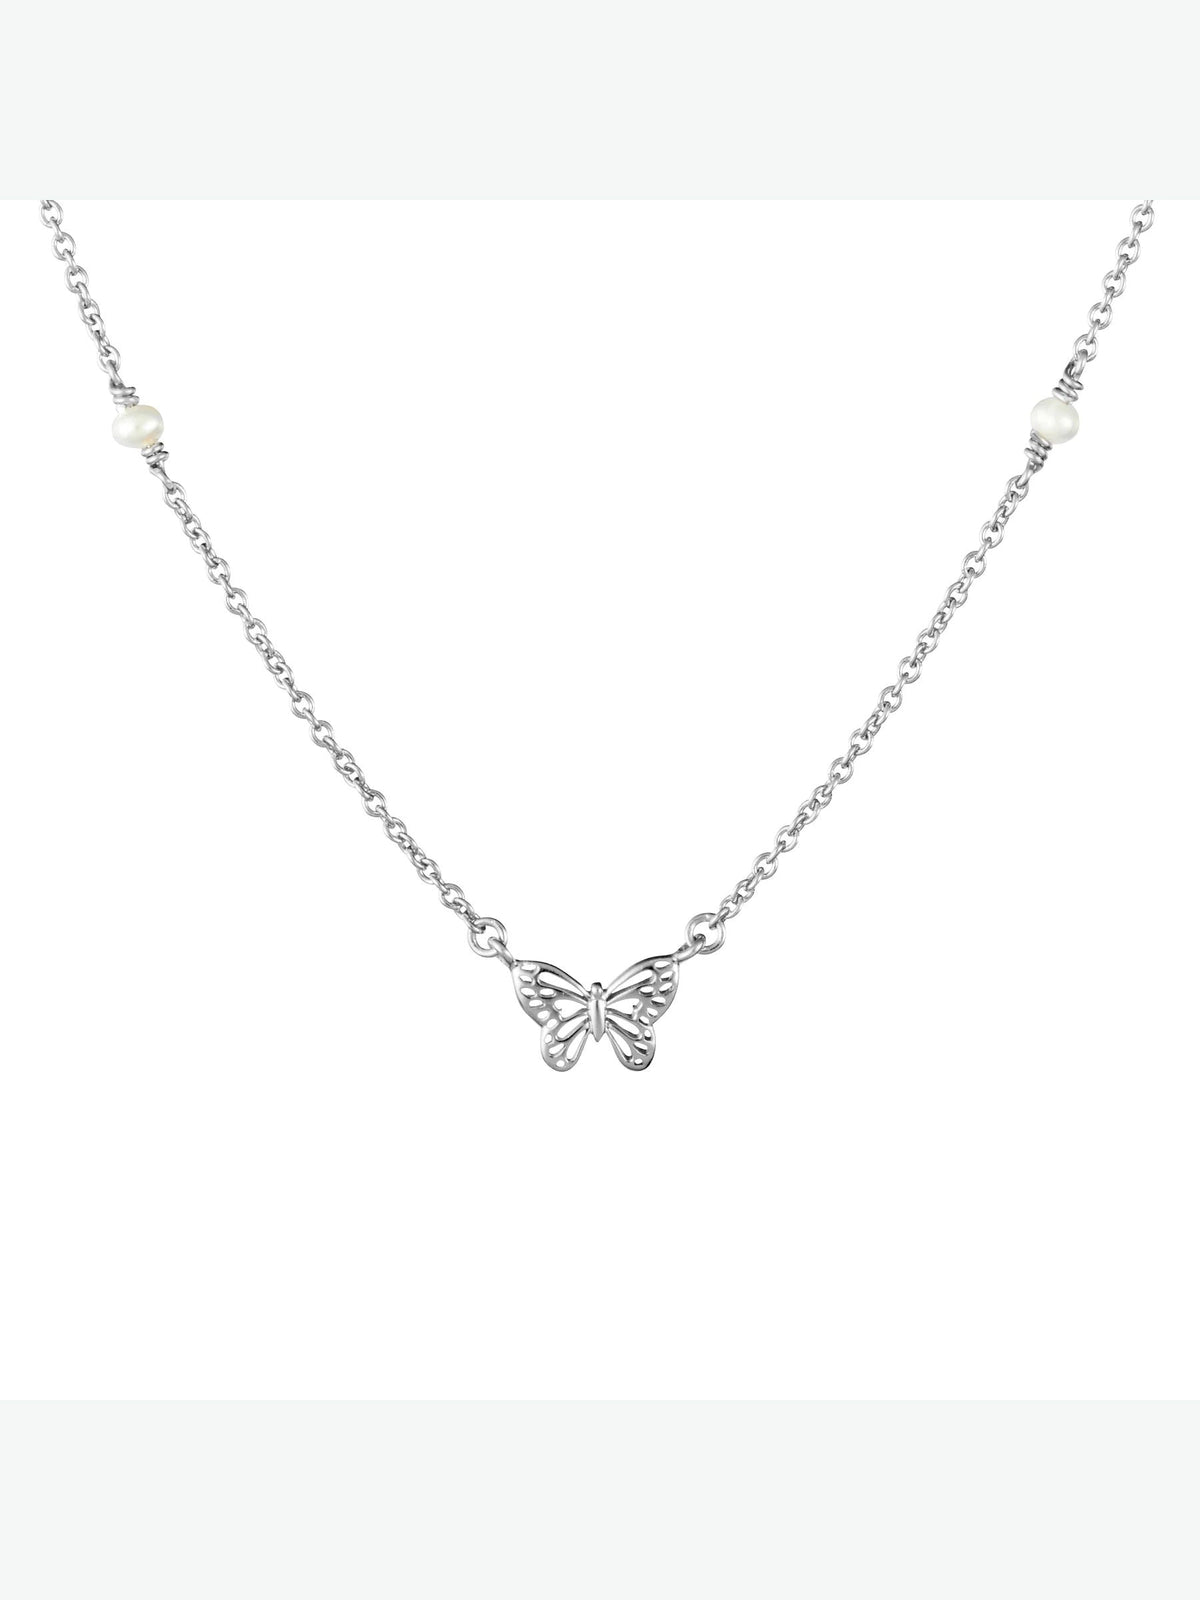 Butterfly Pearl Necklace Midsummer Star Midsummer Star, Sterling Silver, Sterling Silver Necklace